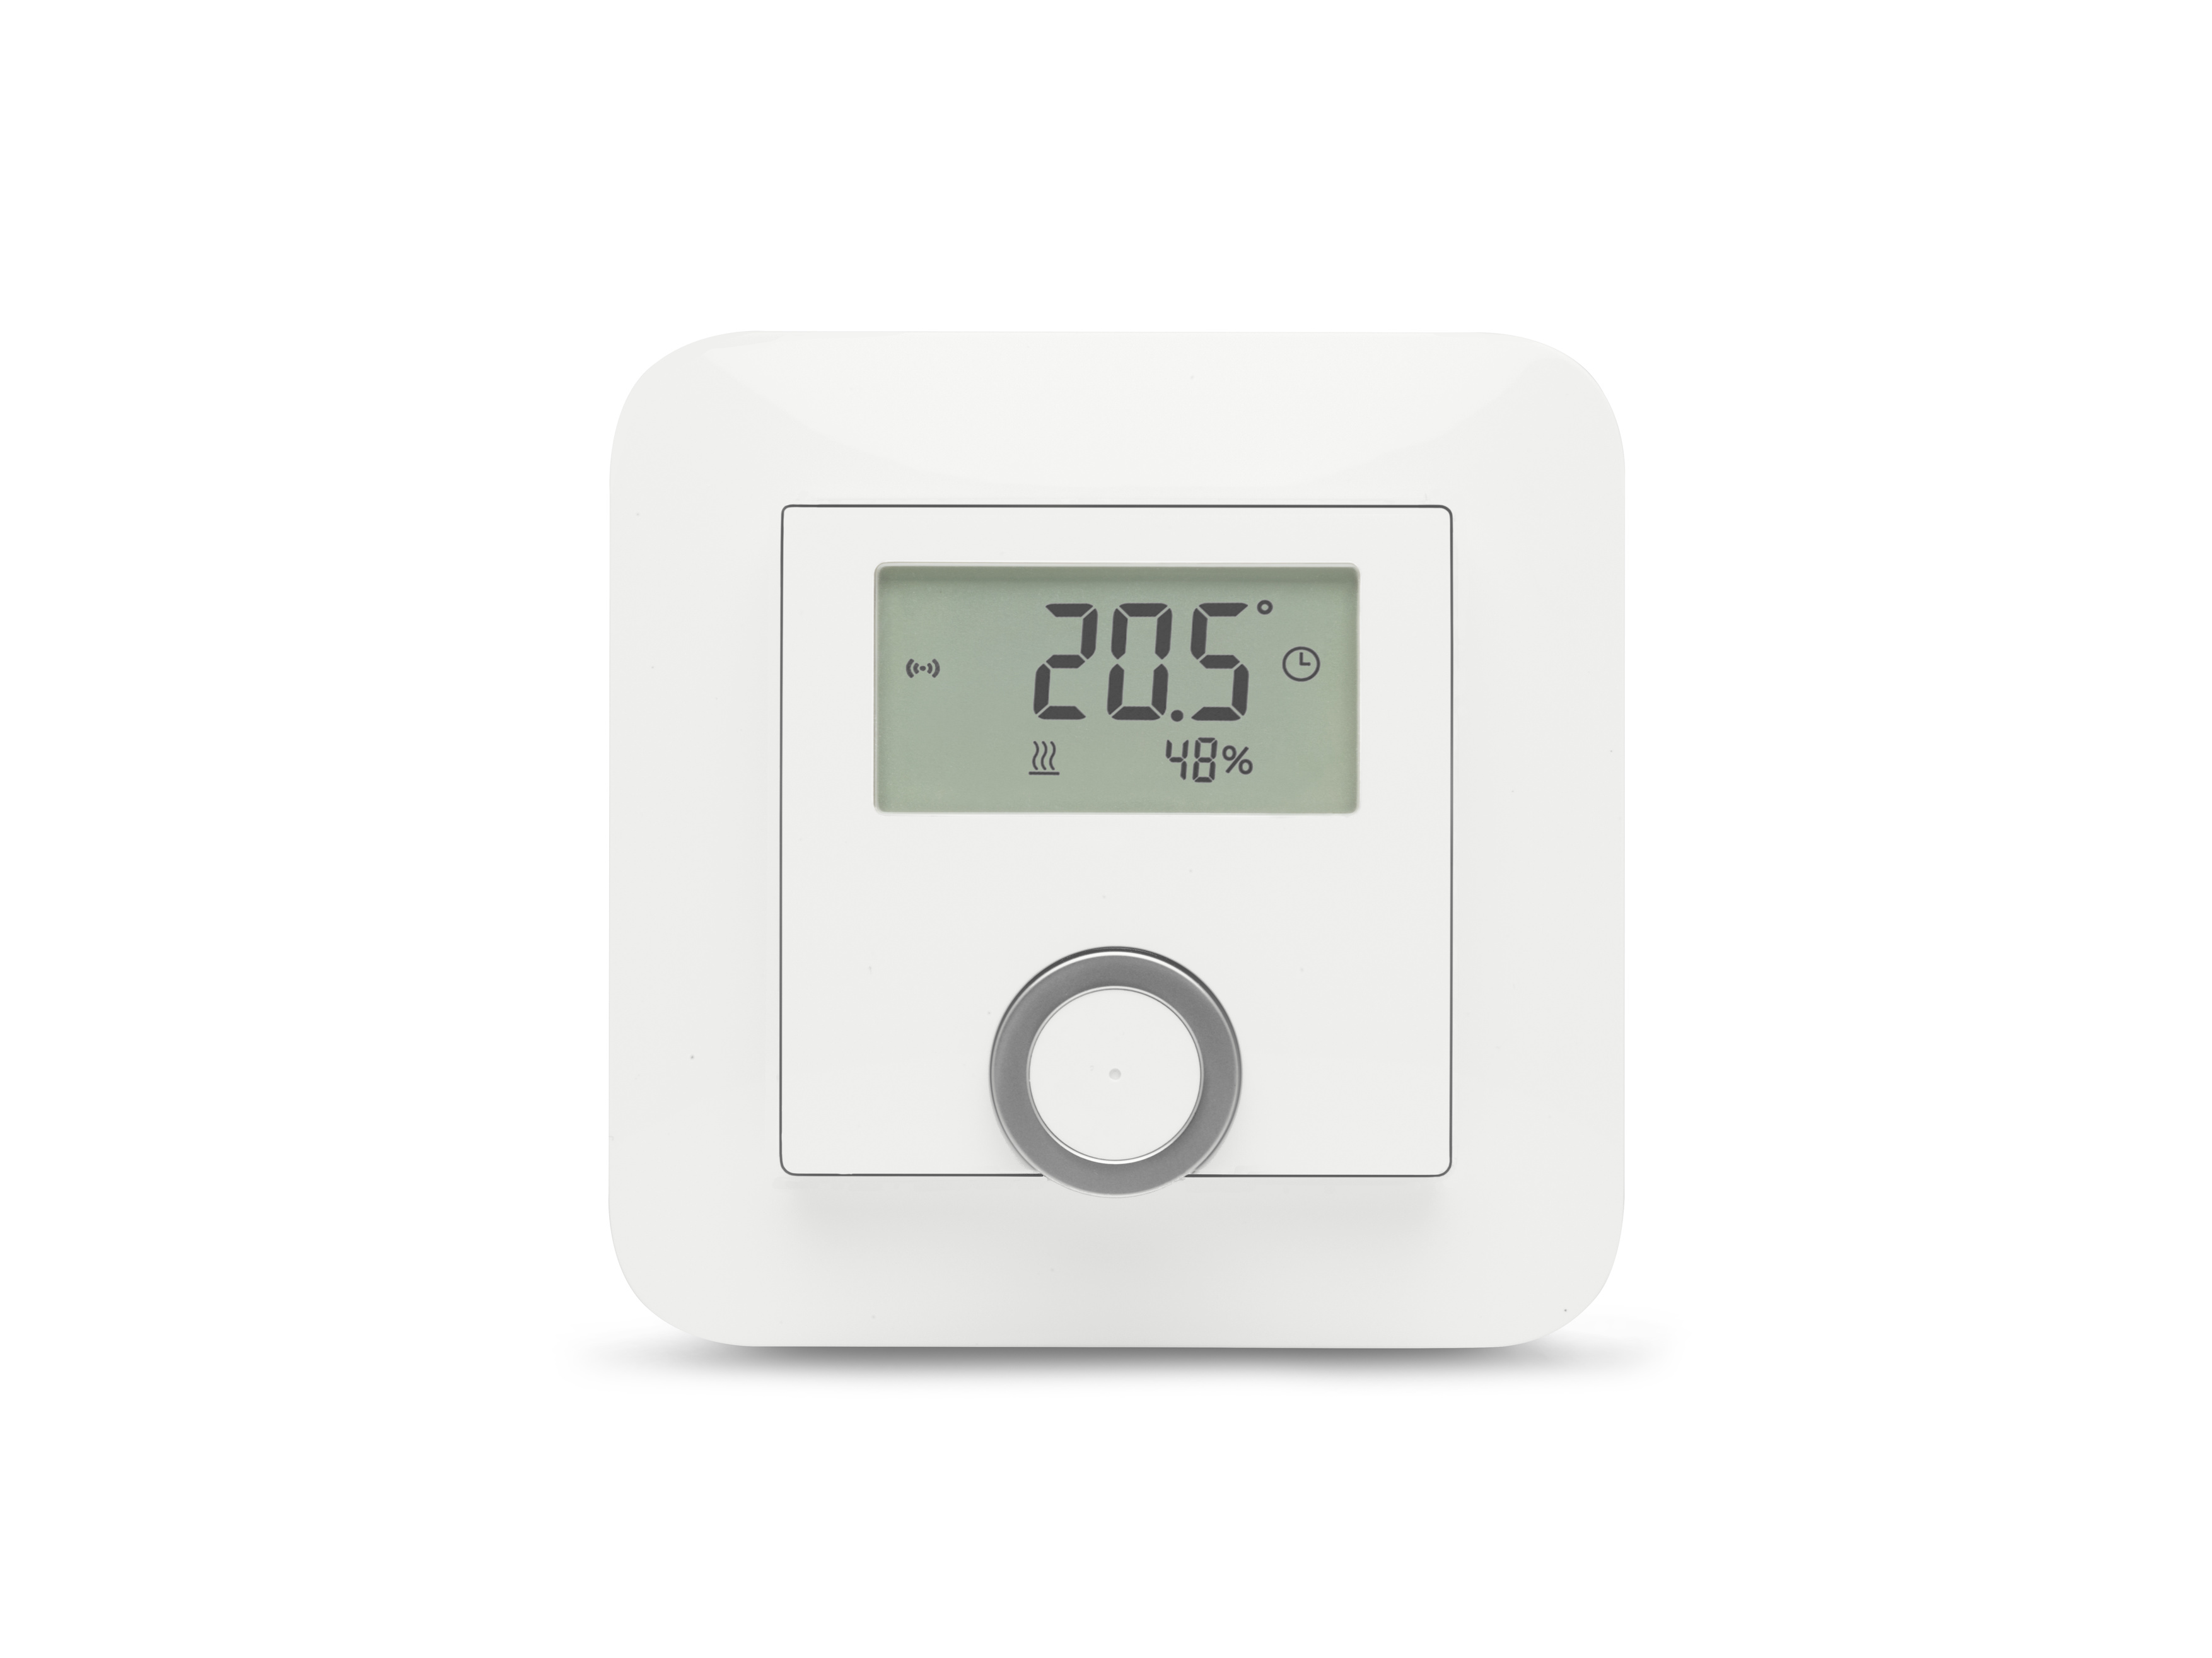 Bosch Individual Room Thermostat campaign page